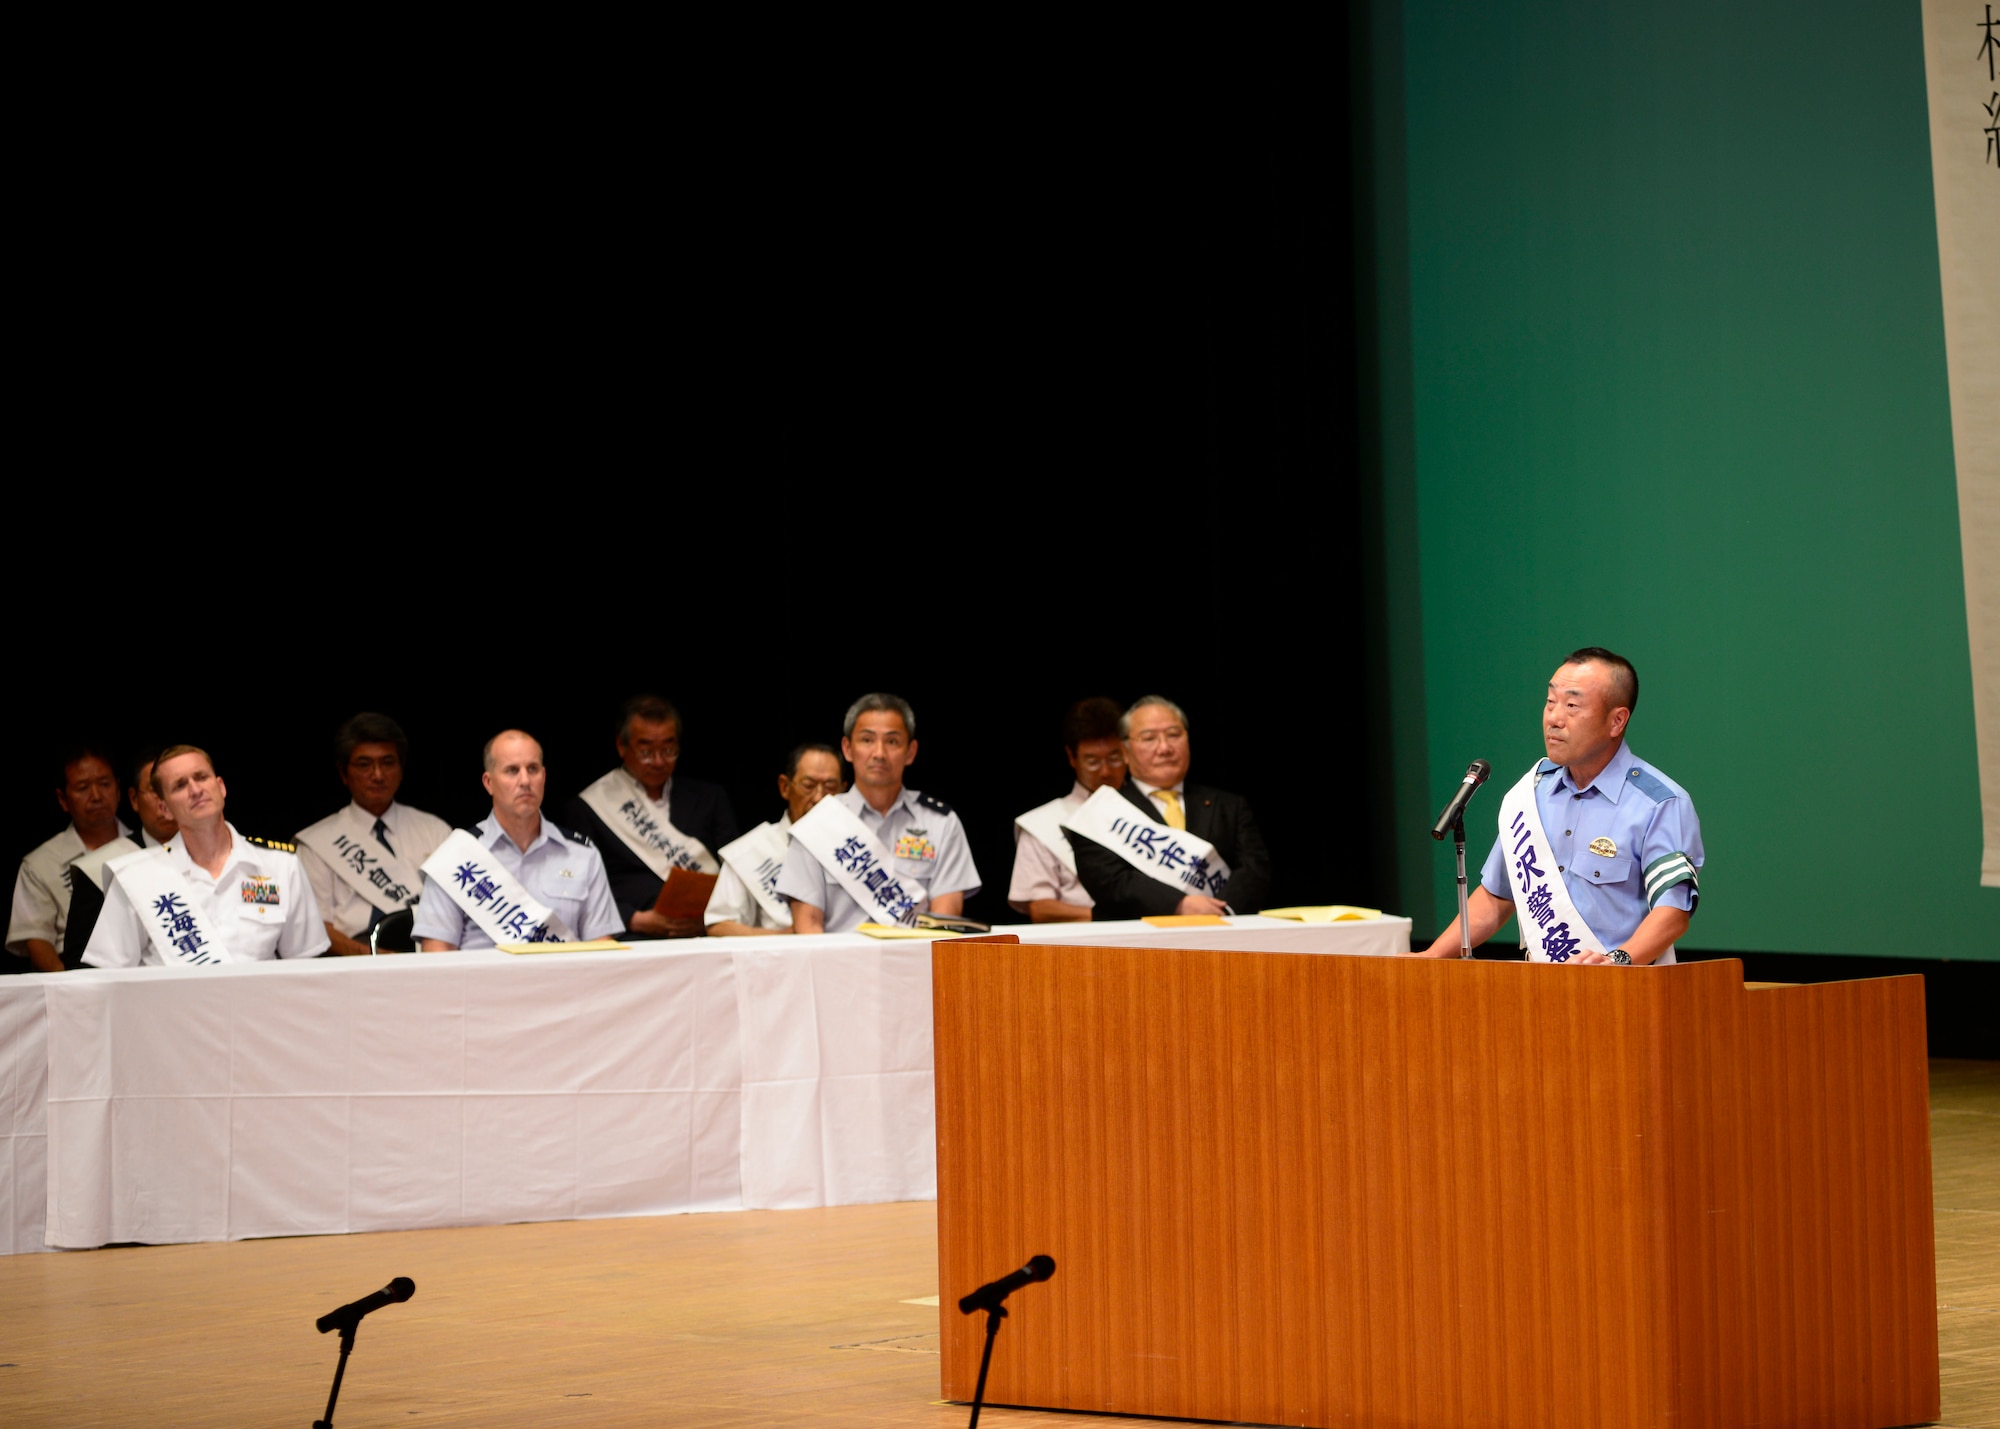 Nobuhiro Izumida, the Misawa City police chief, speaks on behalf of the Misawa City Police during the Prefectural Summer Traffic Safety Campaign 2017, at Misawa City, Japan, July 21, 2017. The event highlighted traffic safety and reminded service members and civilians to take precautionary measures while behind the wheel in order to minimize accidents. (U.S. Navy Photo by Mass Communication Specialist 3rd Class Samuel Bacon)